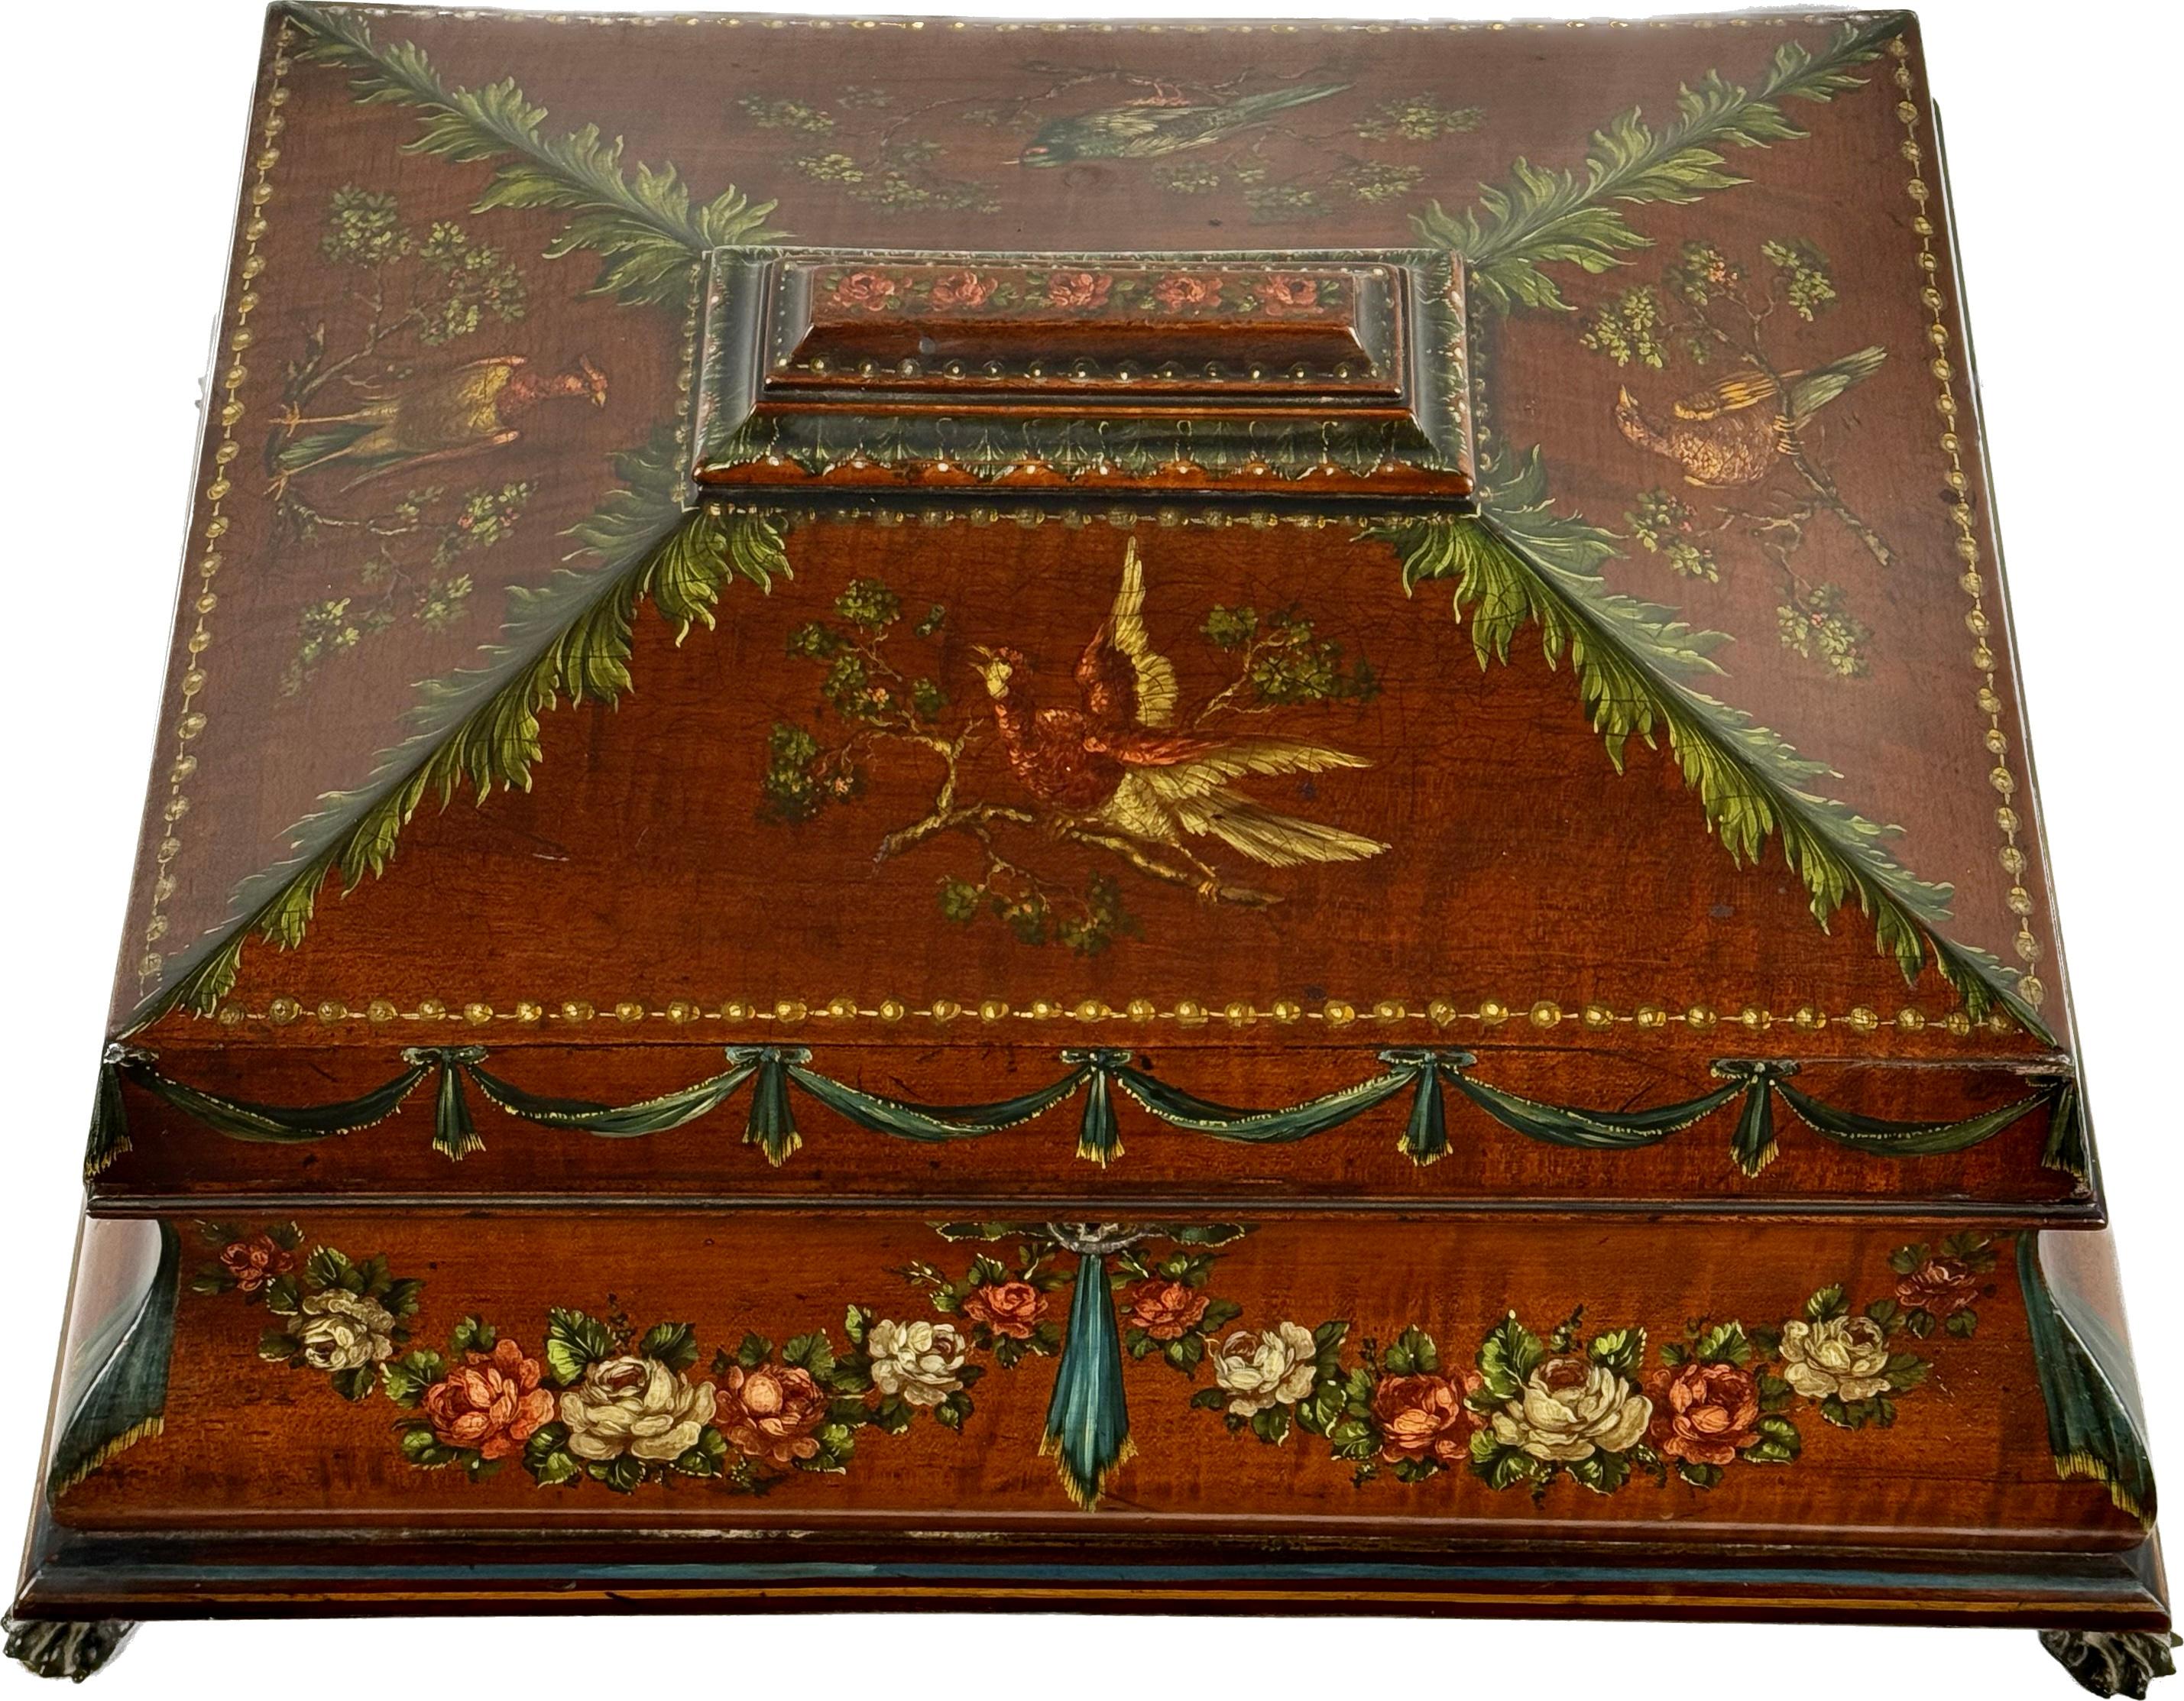 Unique satinwood painted English dresser box from the 19th century. Box has colorful floral and ribbon design with exotic birds on a beautiful satinwood background. Designs are in earth tone colors of green, cream, pink and teal with gold trim.